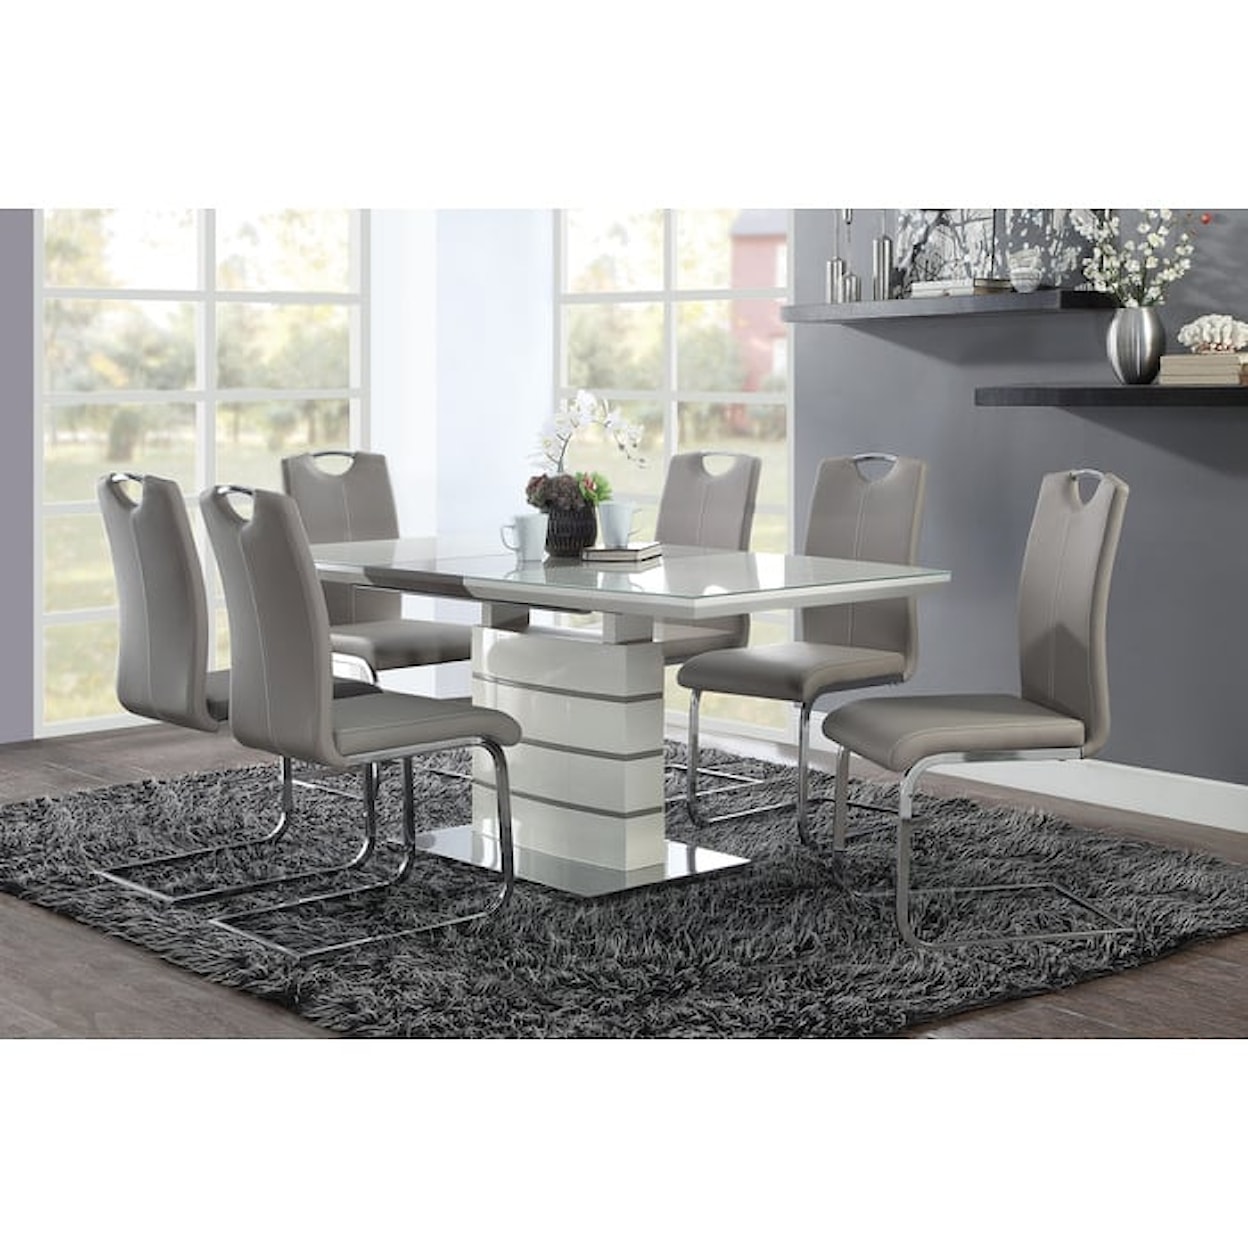 Homelegance Glissand Dining Table